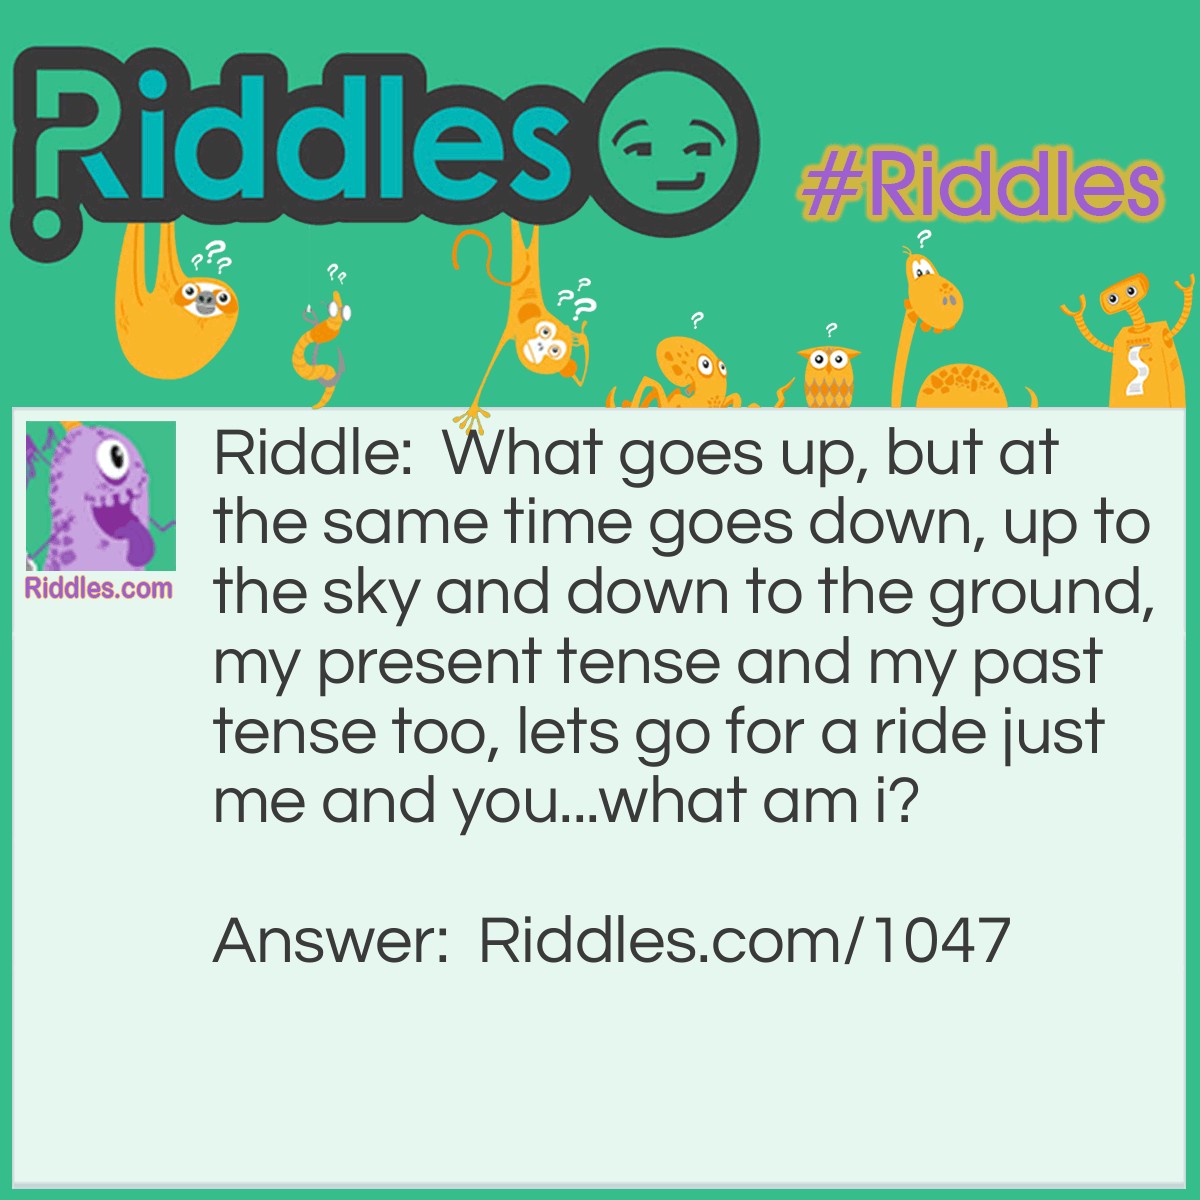 Riddle: What goes up, but at the same time goes down, up to the sky and down to the ground, my present tense and my past tense too, lets go for a ride just me and you...
what am I? Answer: A see-saw